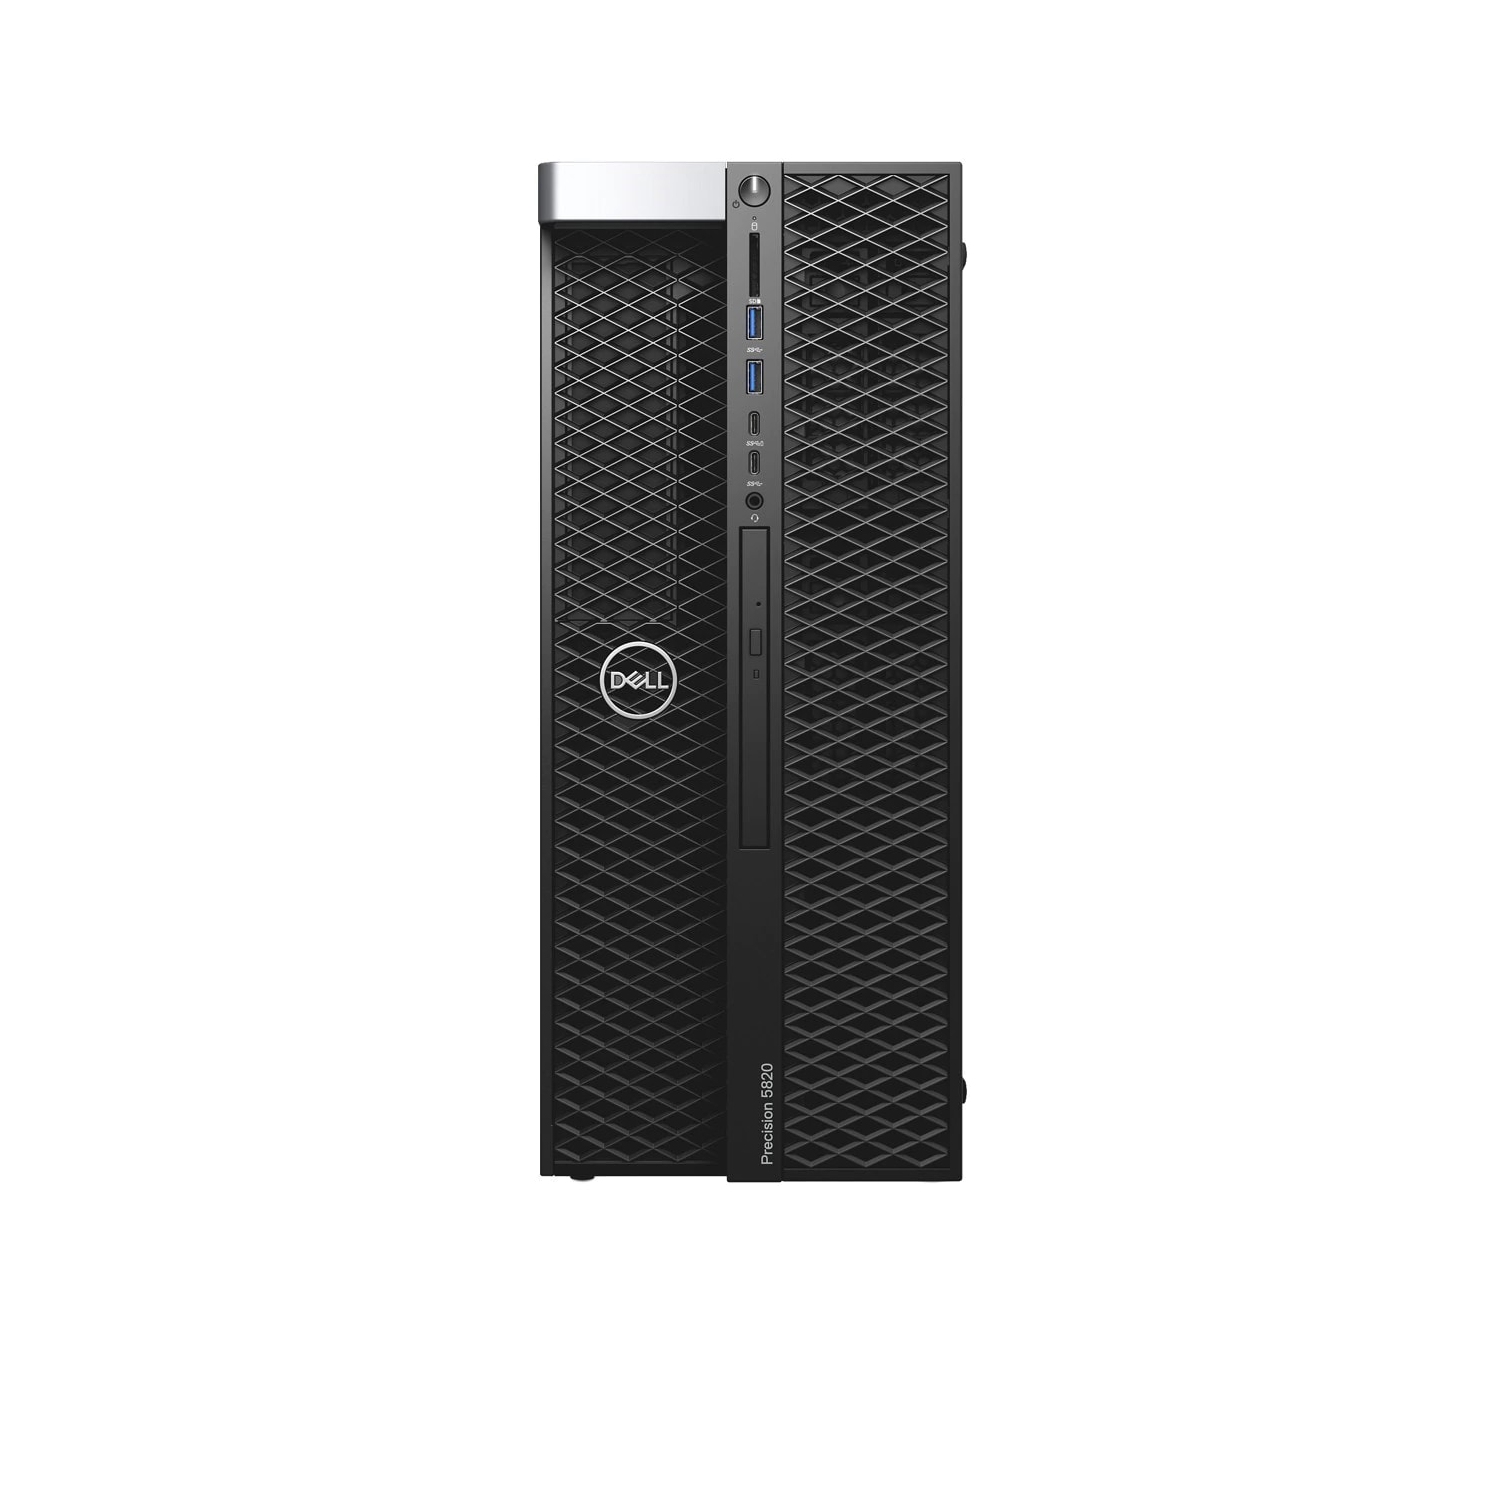 Refurbished (Excellent) - Dell Precision T5820 Workstation Desktop (2018) | Core Xeon W - 256GB SSD - 64GB RAM - RTX 4000 | 8 Cores @ 4.5 GHz Certified Refurbished